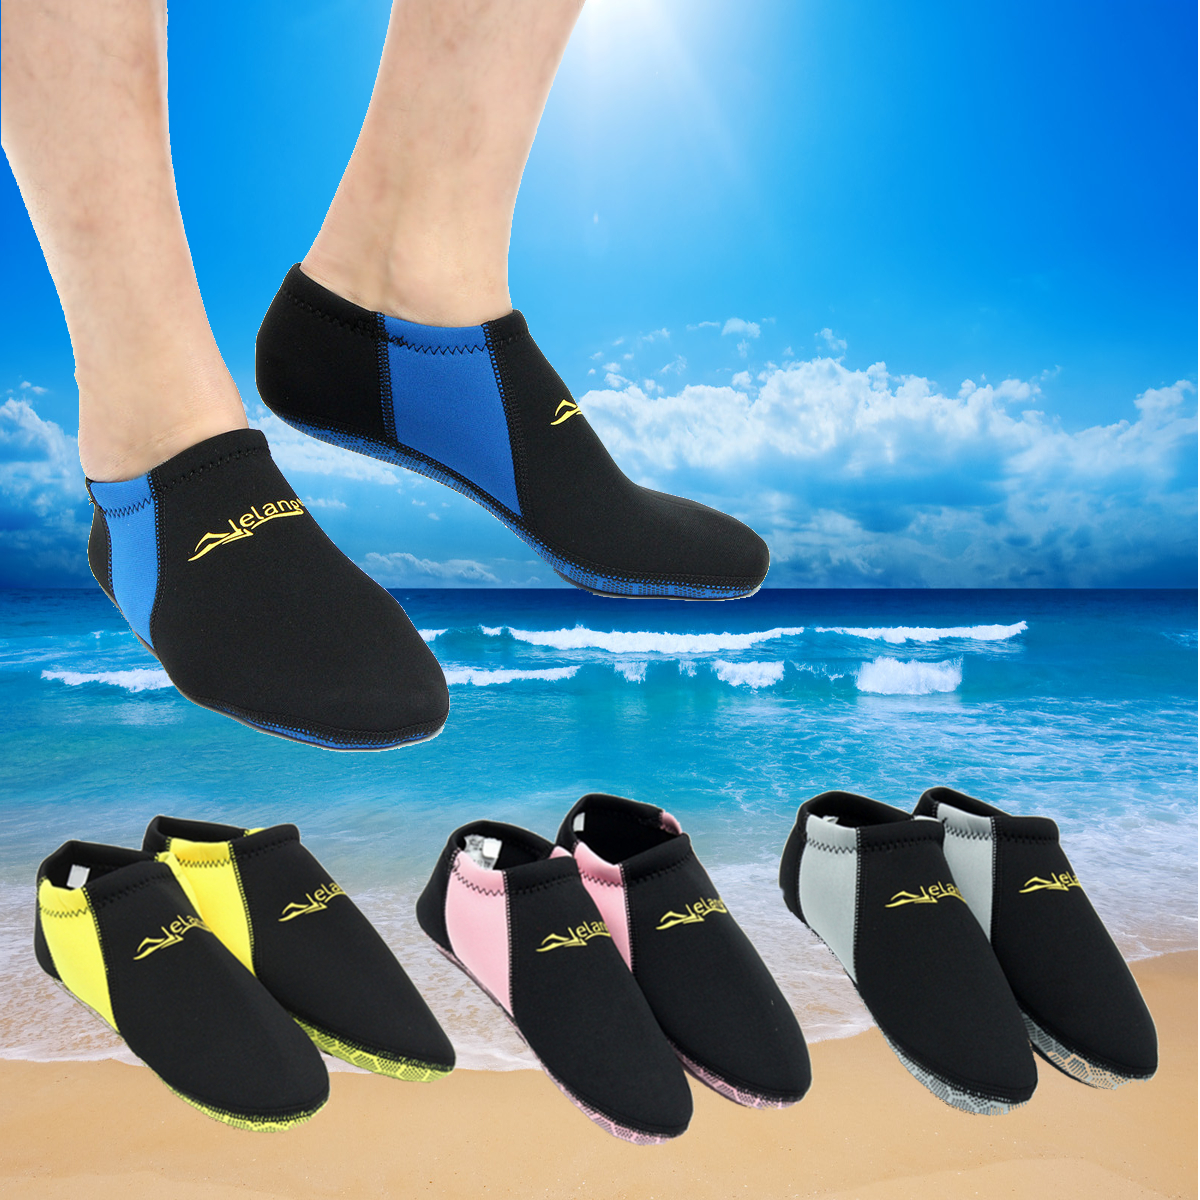 Outdoor-Swimming-Snorkel-Socks-Soft-Beach-Shoes-Water-Sport-Scuba-Surf-Diving-1130872-1